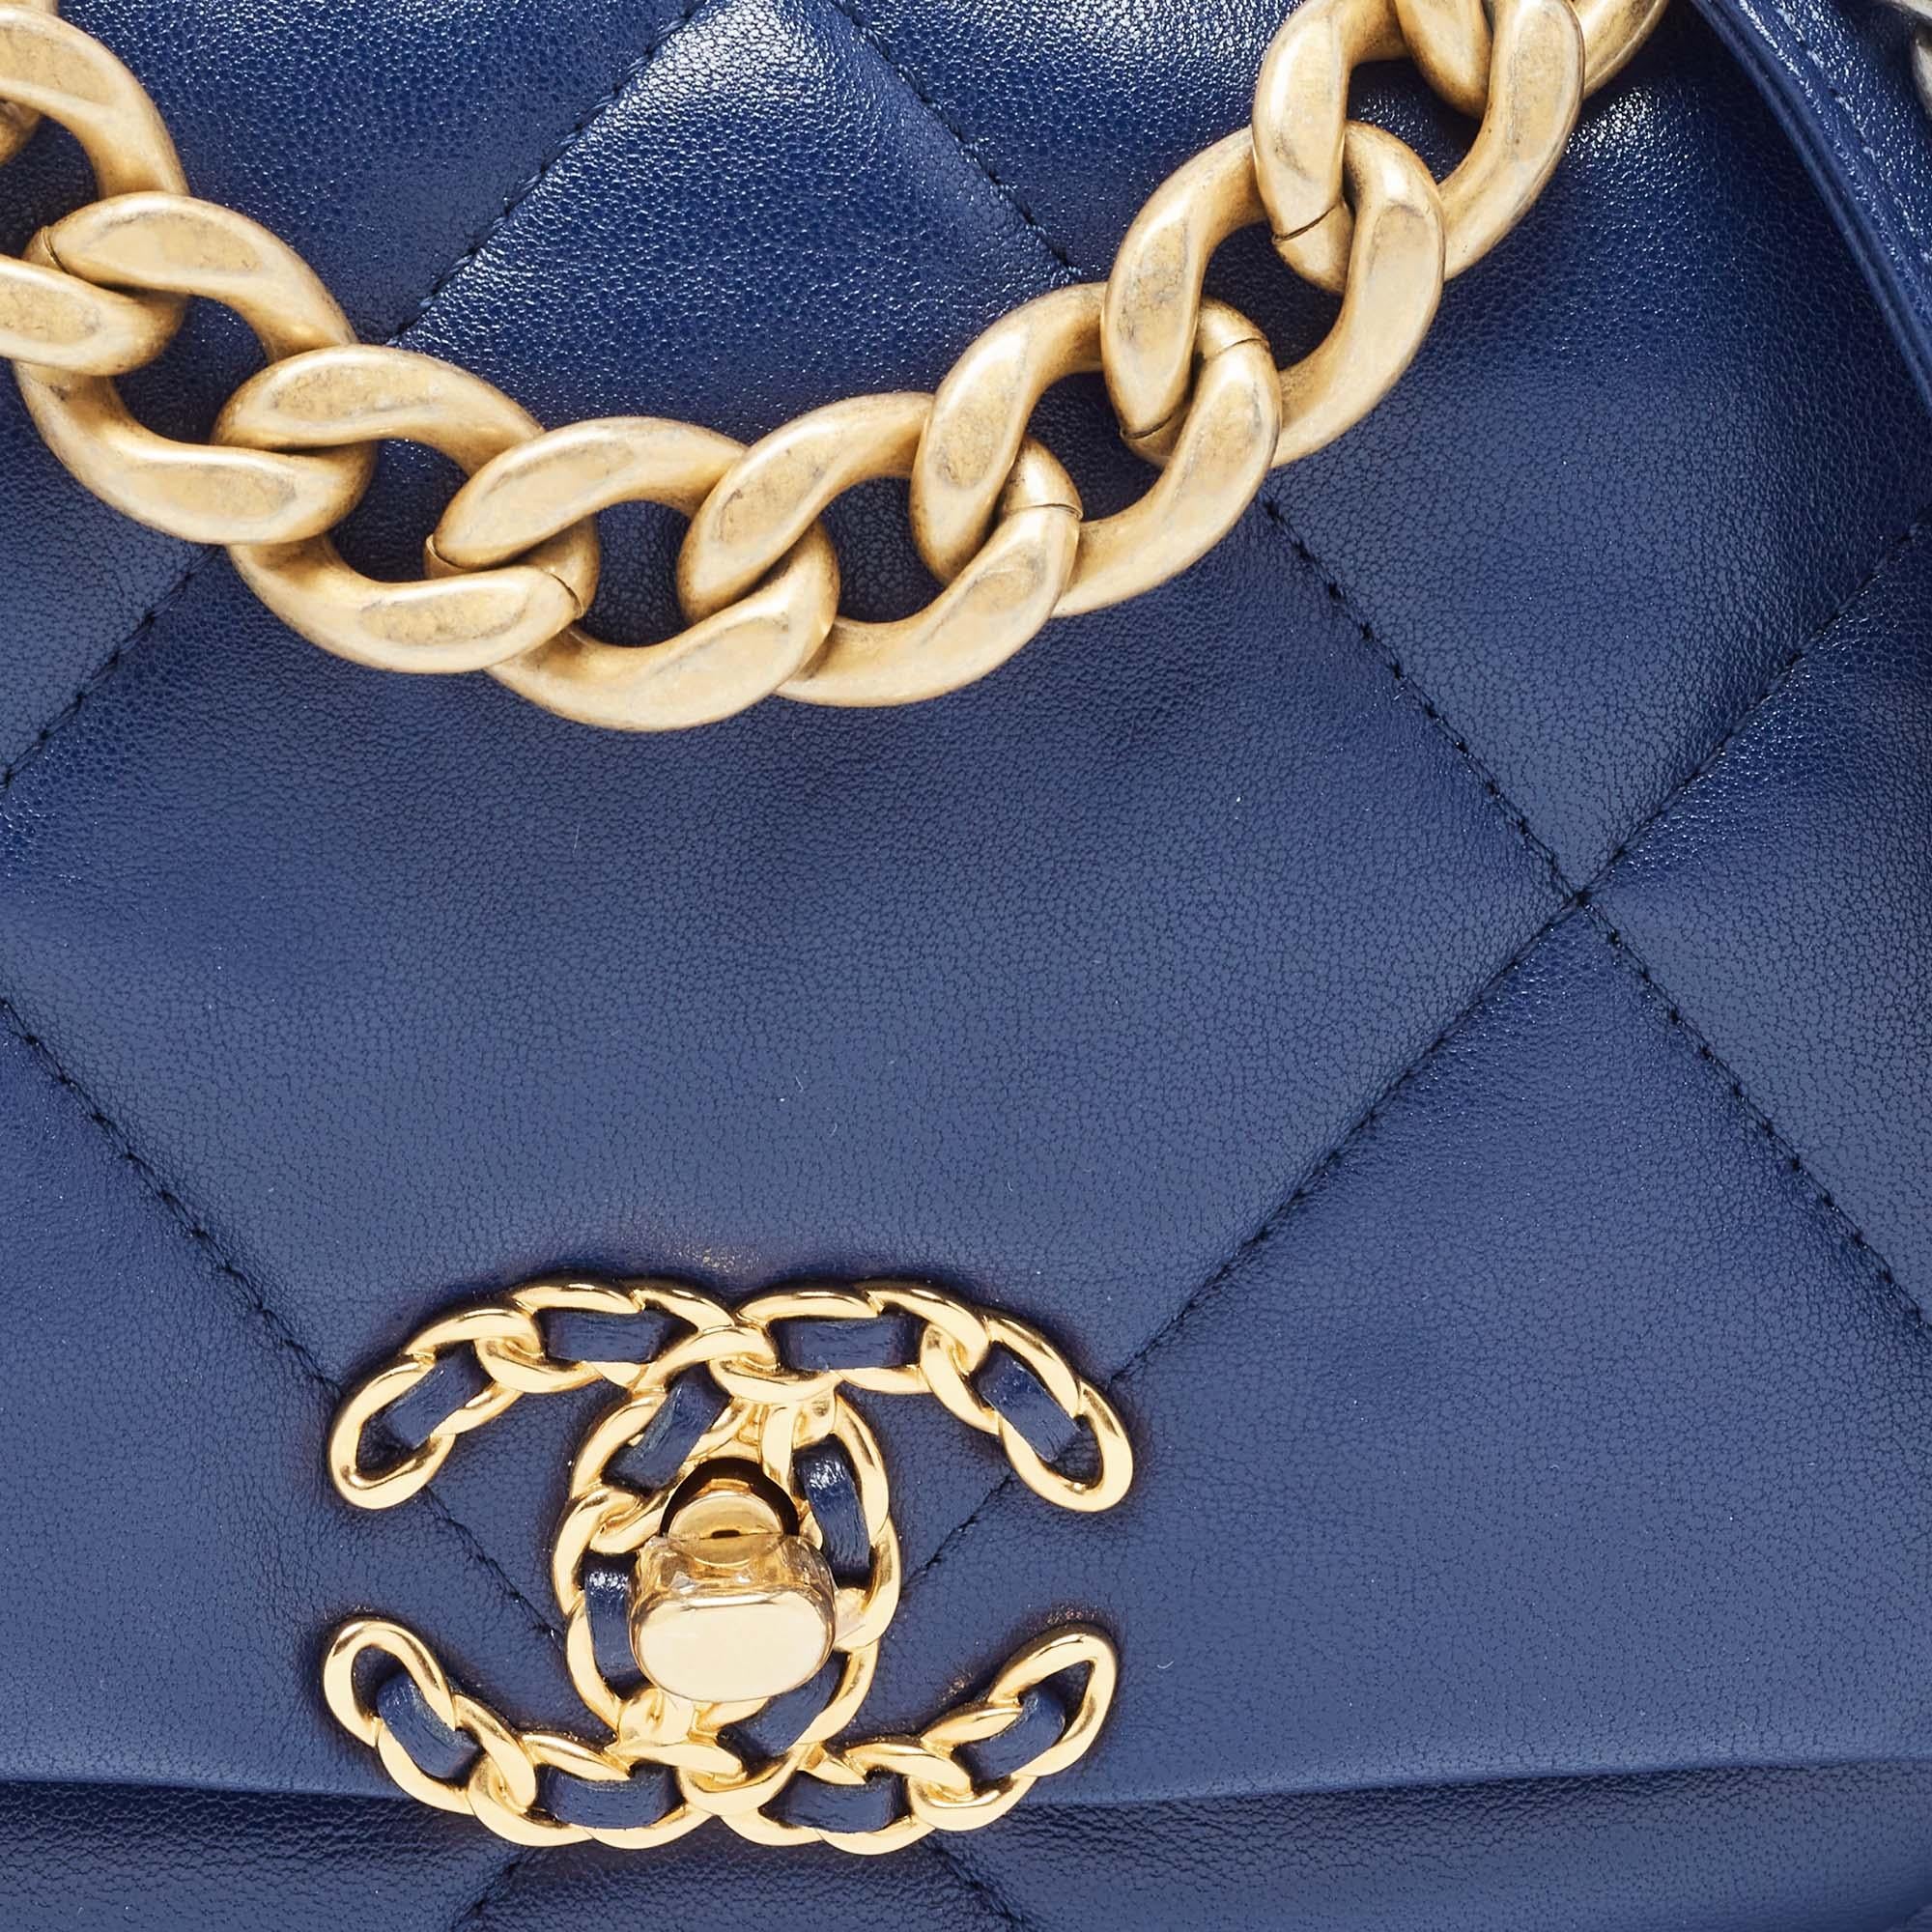 Chanel Blue Quilted Leather Medium 19 Flap Bag For Sale 5